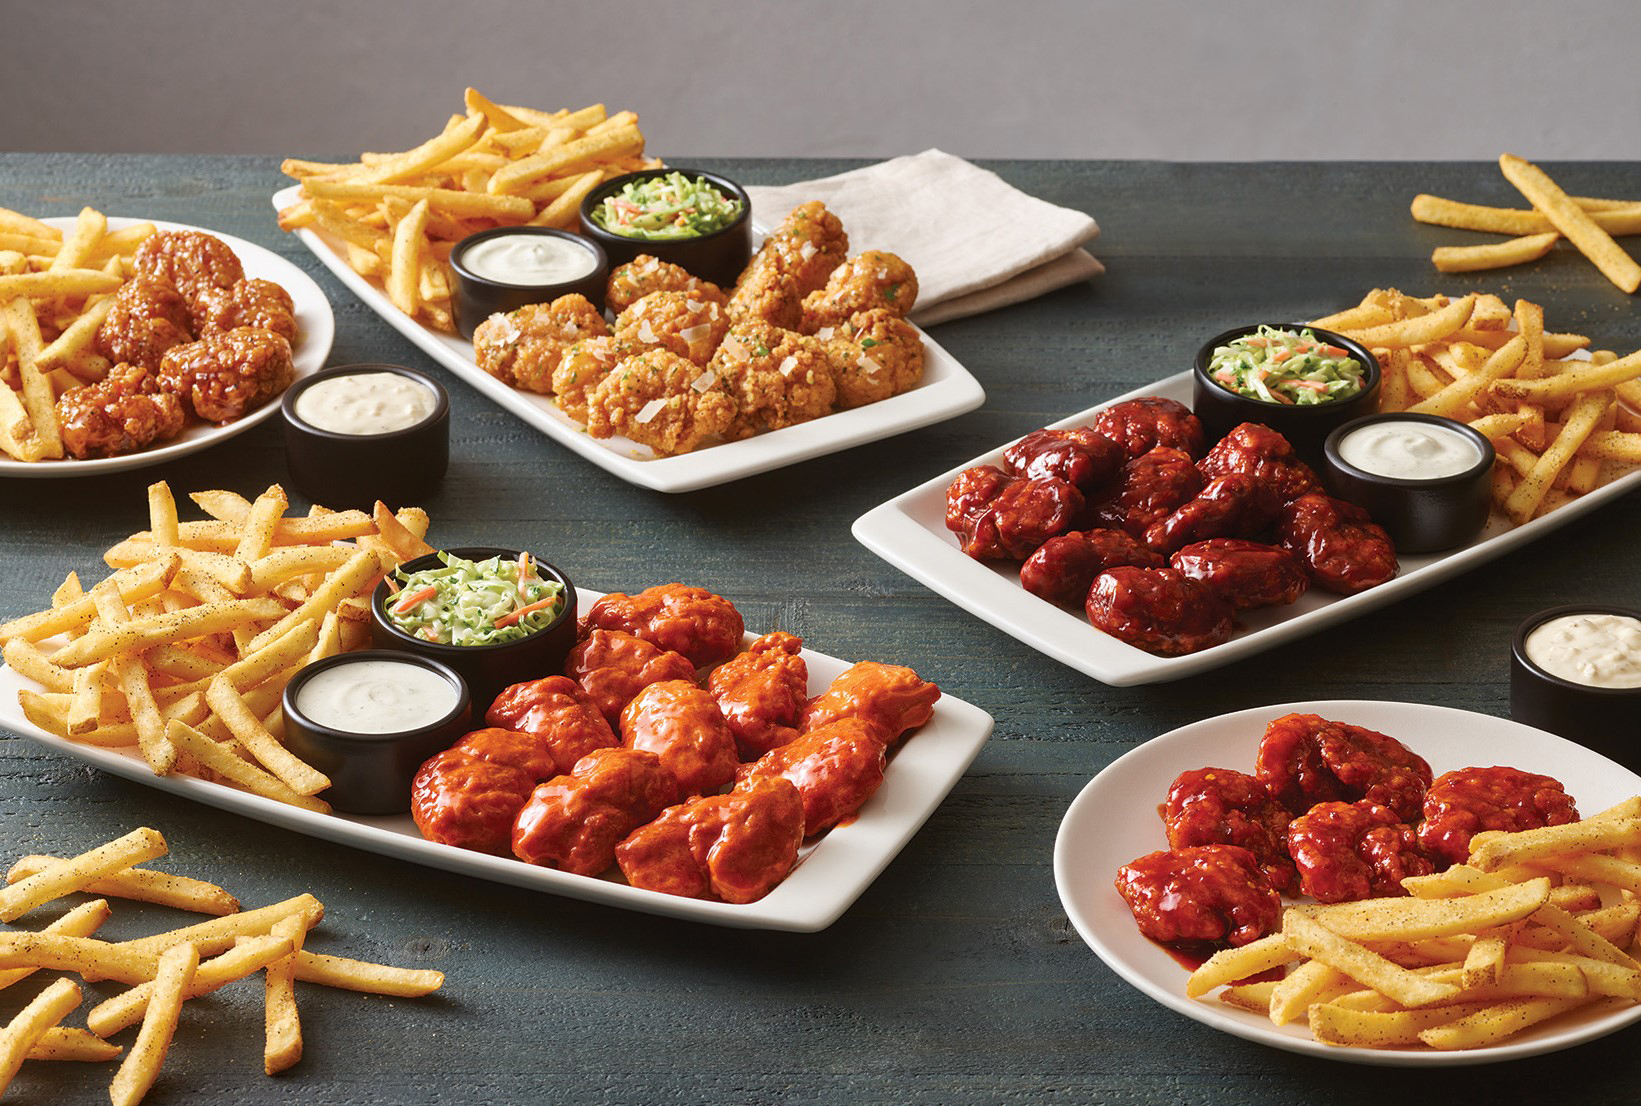 This allyoucaneat boneless wing deal at Applebee’s is too good to